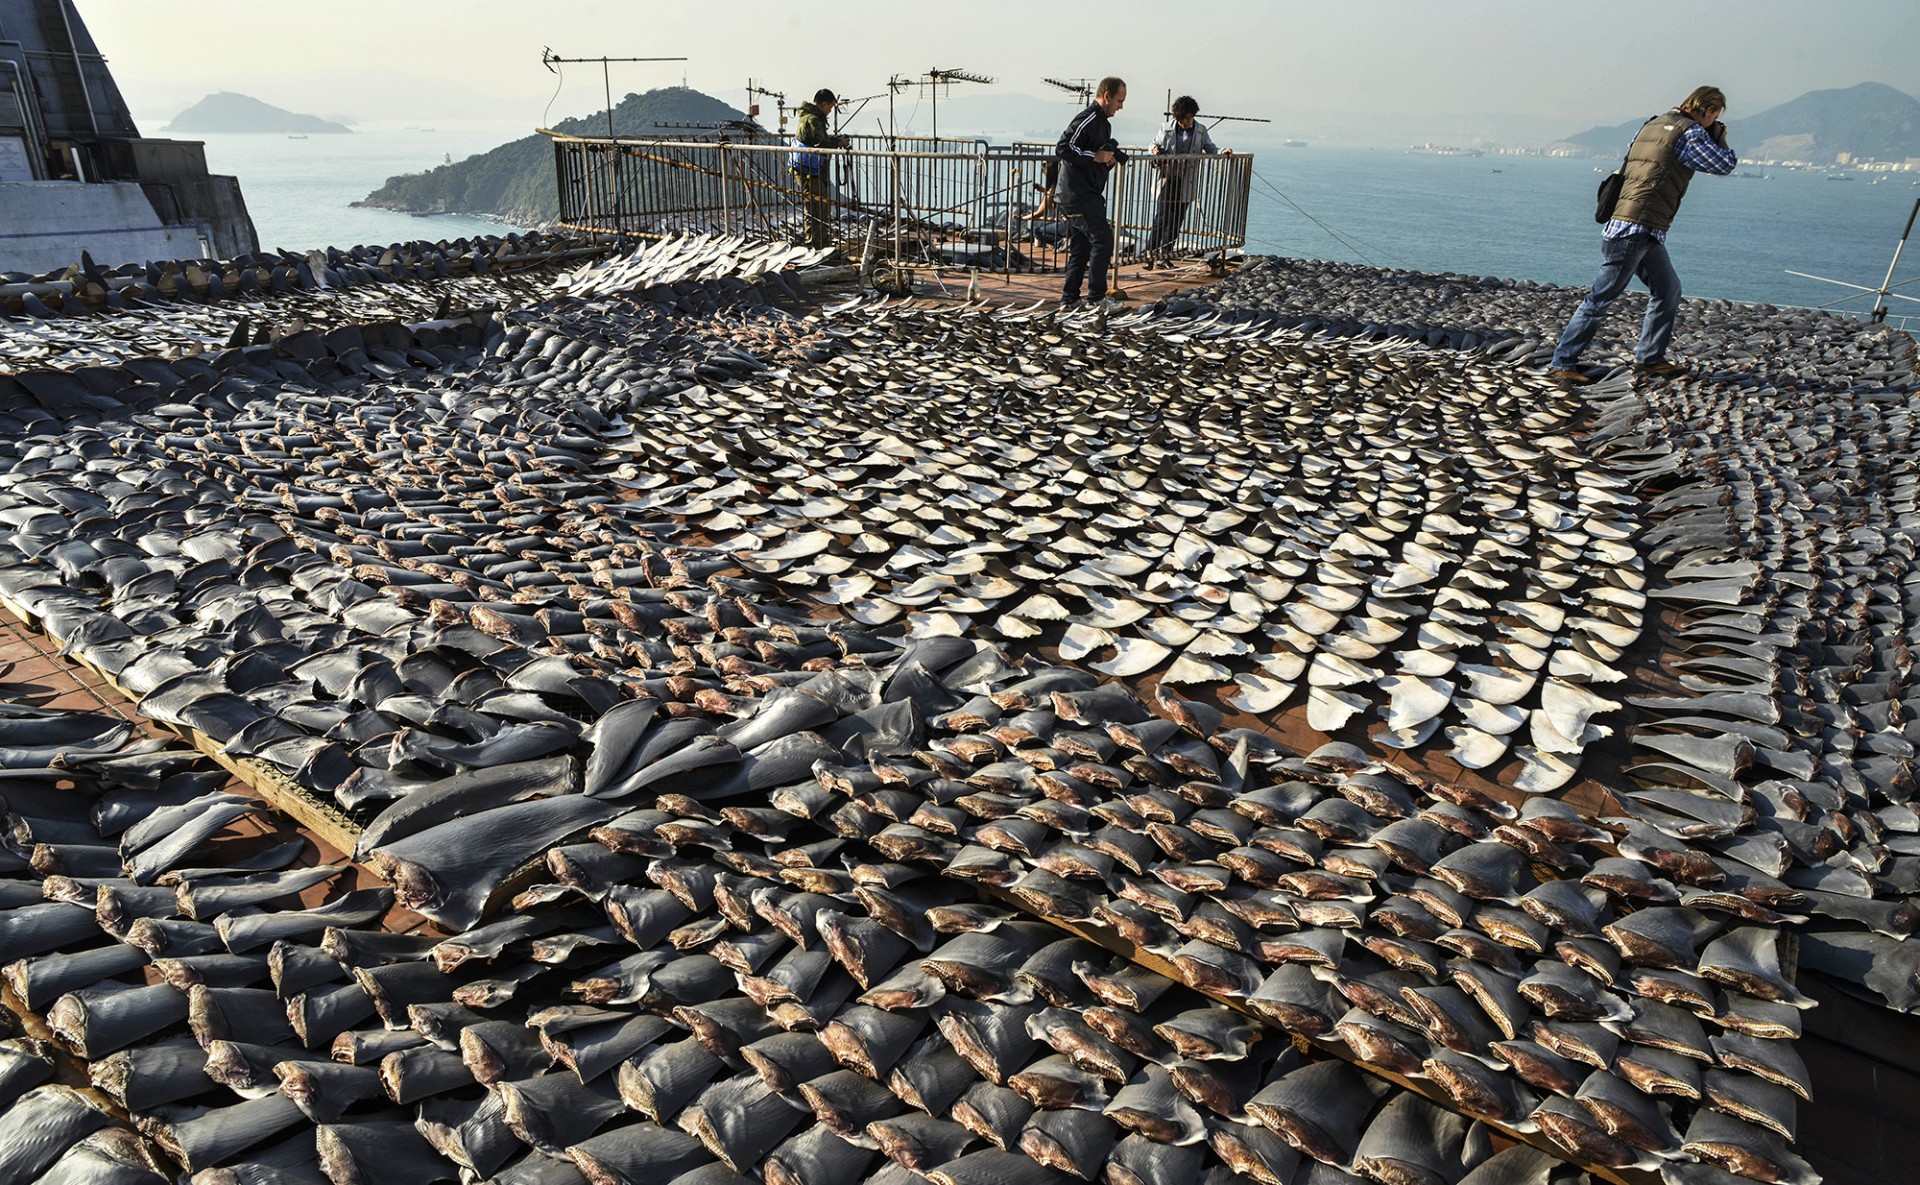 Shark fins dry in the sun covering the roof of a factory building in Hong Kong on Jan. 2, 2013. Hong Kong is one of the world's biggest markets for shark fins, but imports there have dropped by 29 percent since 2011, according to a new study. Photo: Antony Dickson/AFP/Getty Images